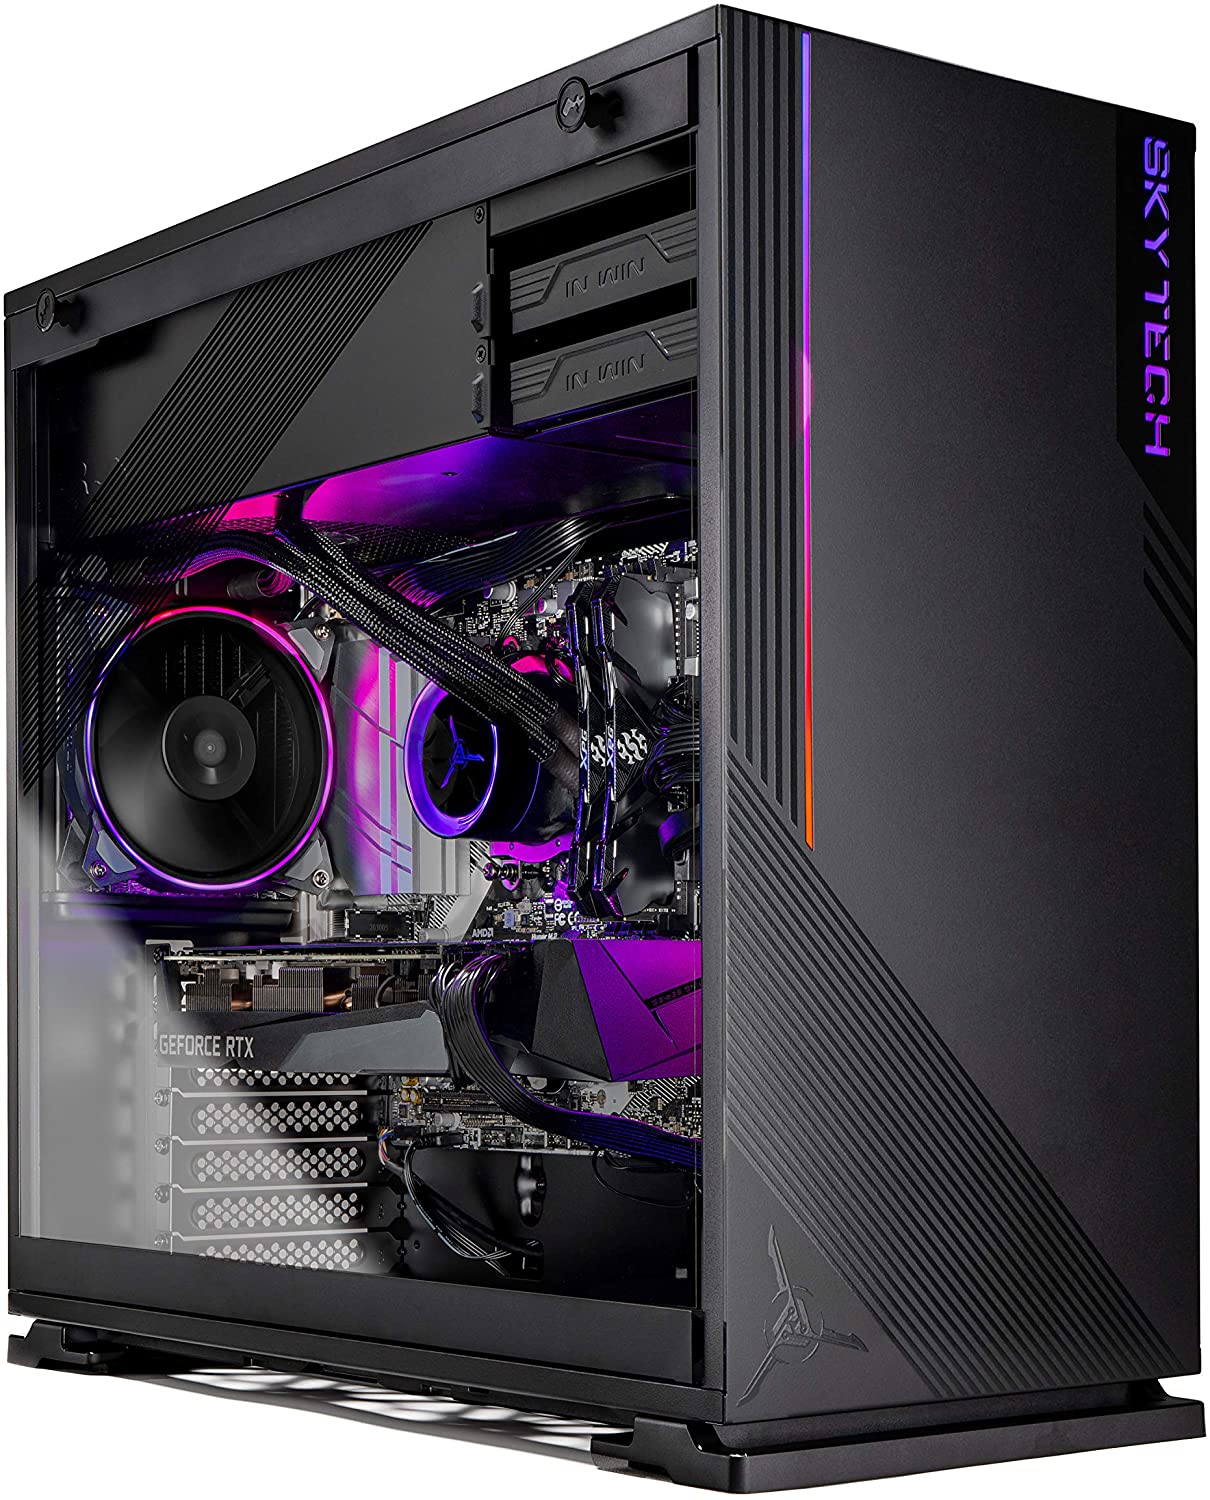 Skytech Azure Gaming Computer Review 2022, Is It A Valuable Gaming PC?